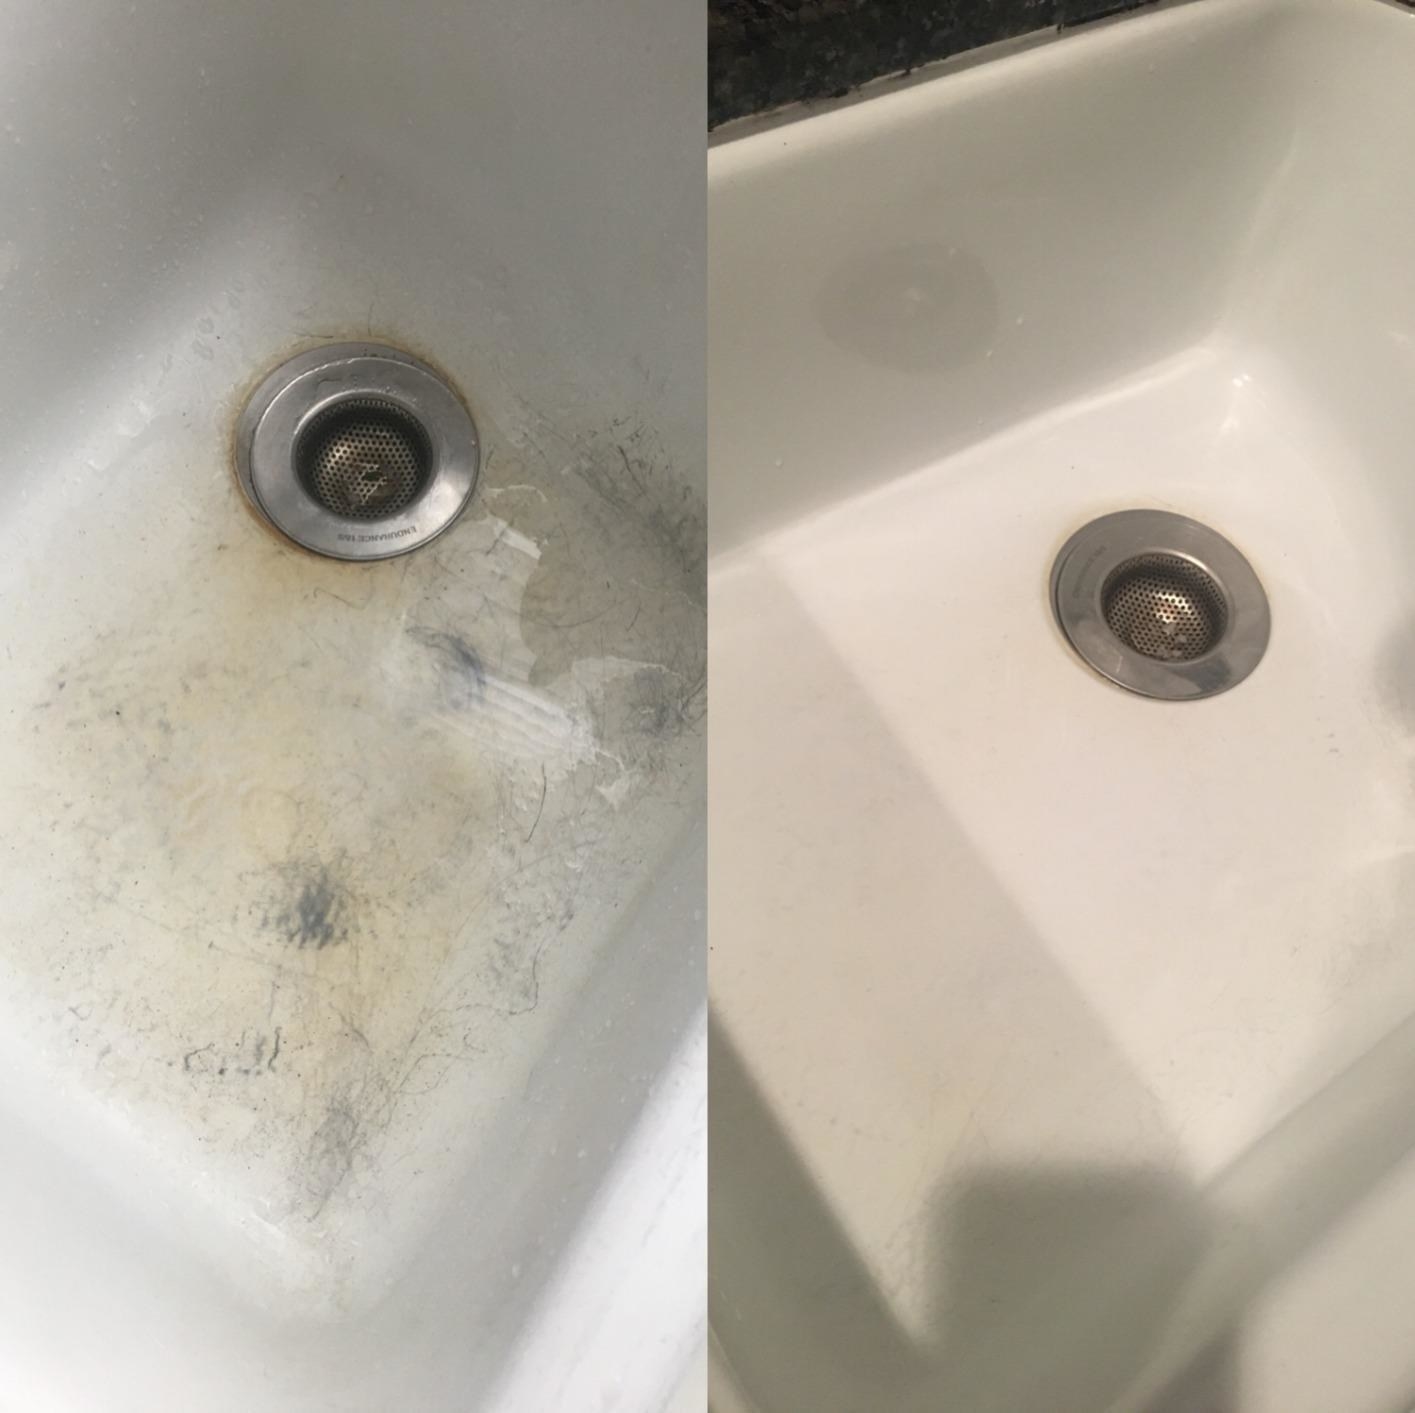 A review image of a marked-up porcelain sink before cleaning, and the after of the same sink looking spotless after cleaning